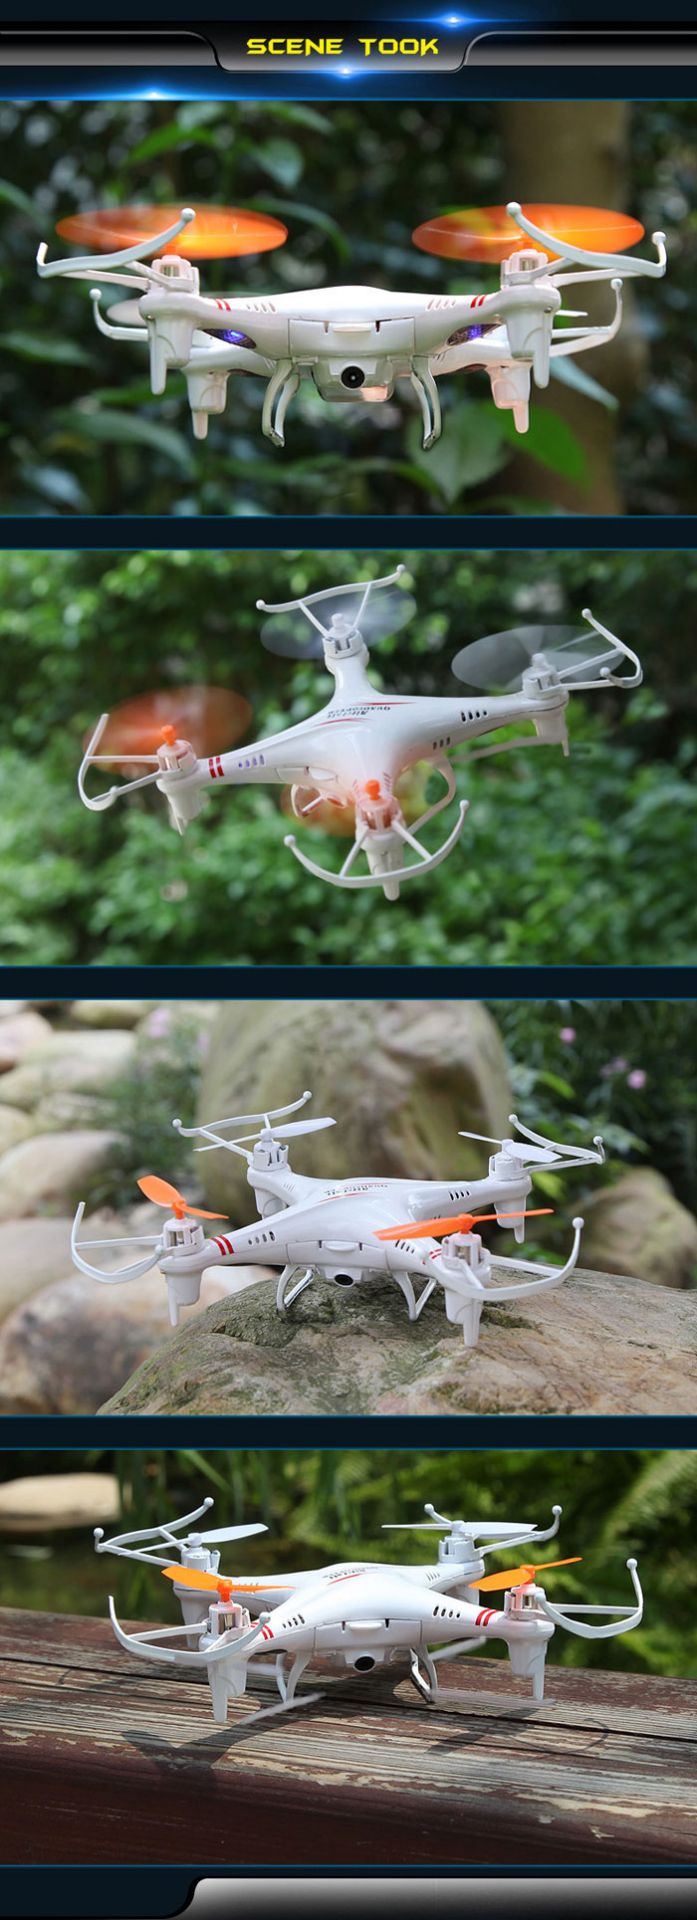 SKYTEC RC QUADCOPTER 4 CHANNEL 6 AXIS 2.4Ghz BNIB BRAND NEW IN BOX Control Helicopters, also refered - Image 4 of 14